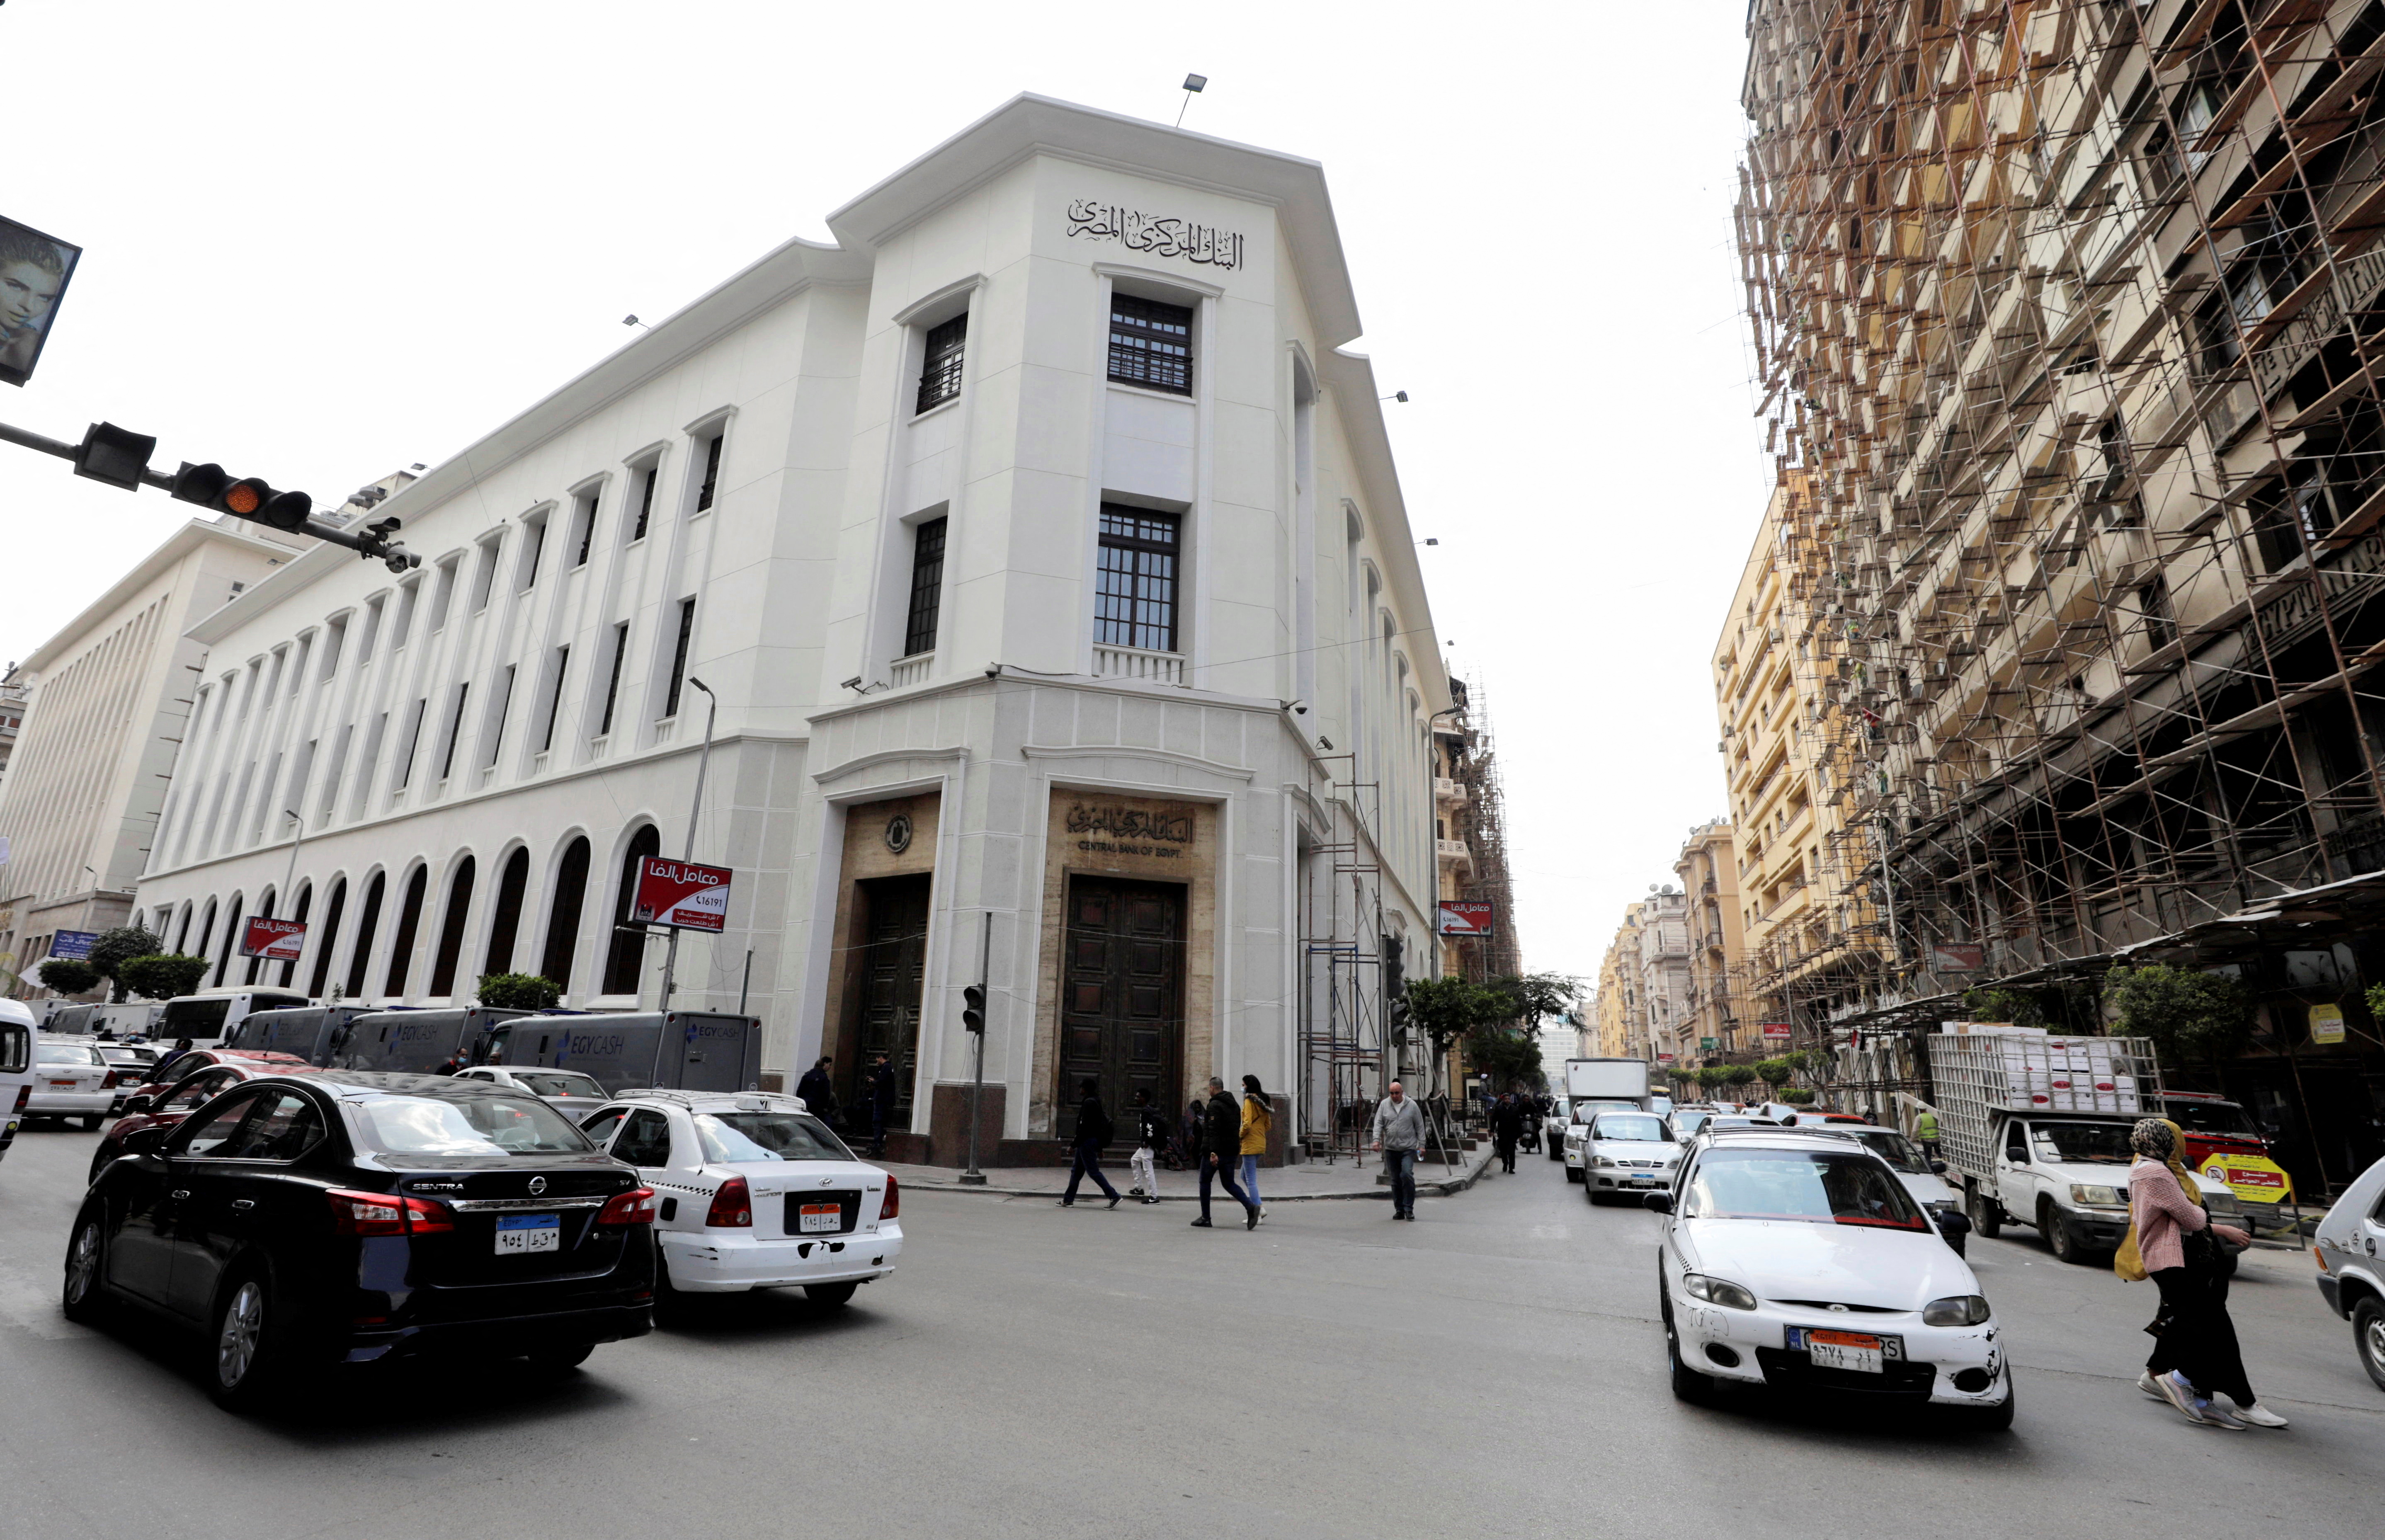 Egypt's Central Bank headquarters are seen in downtown Cairo